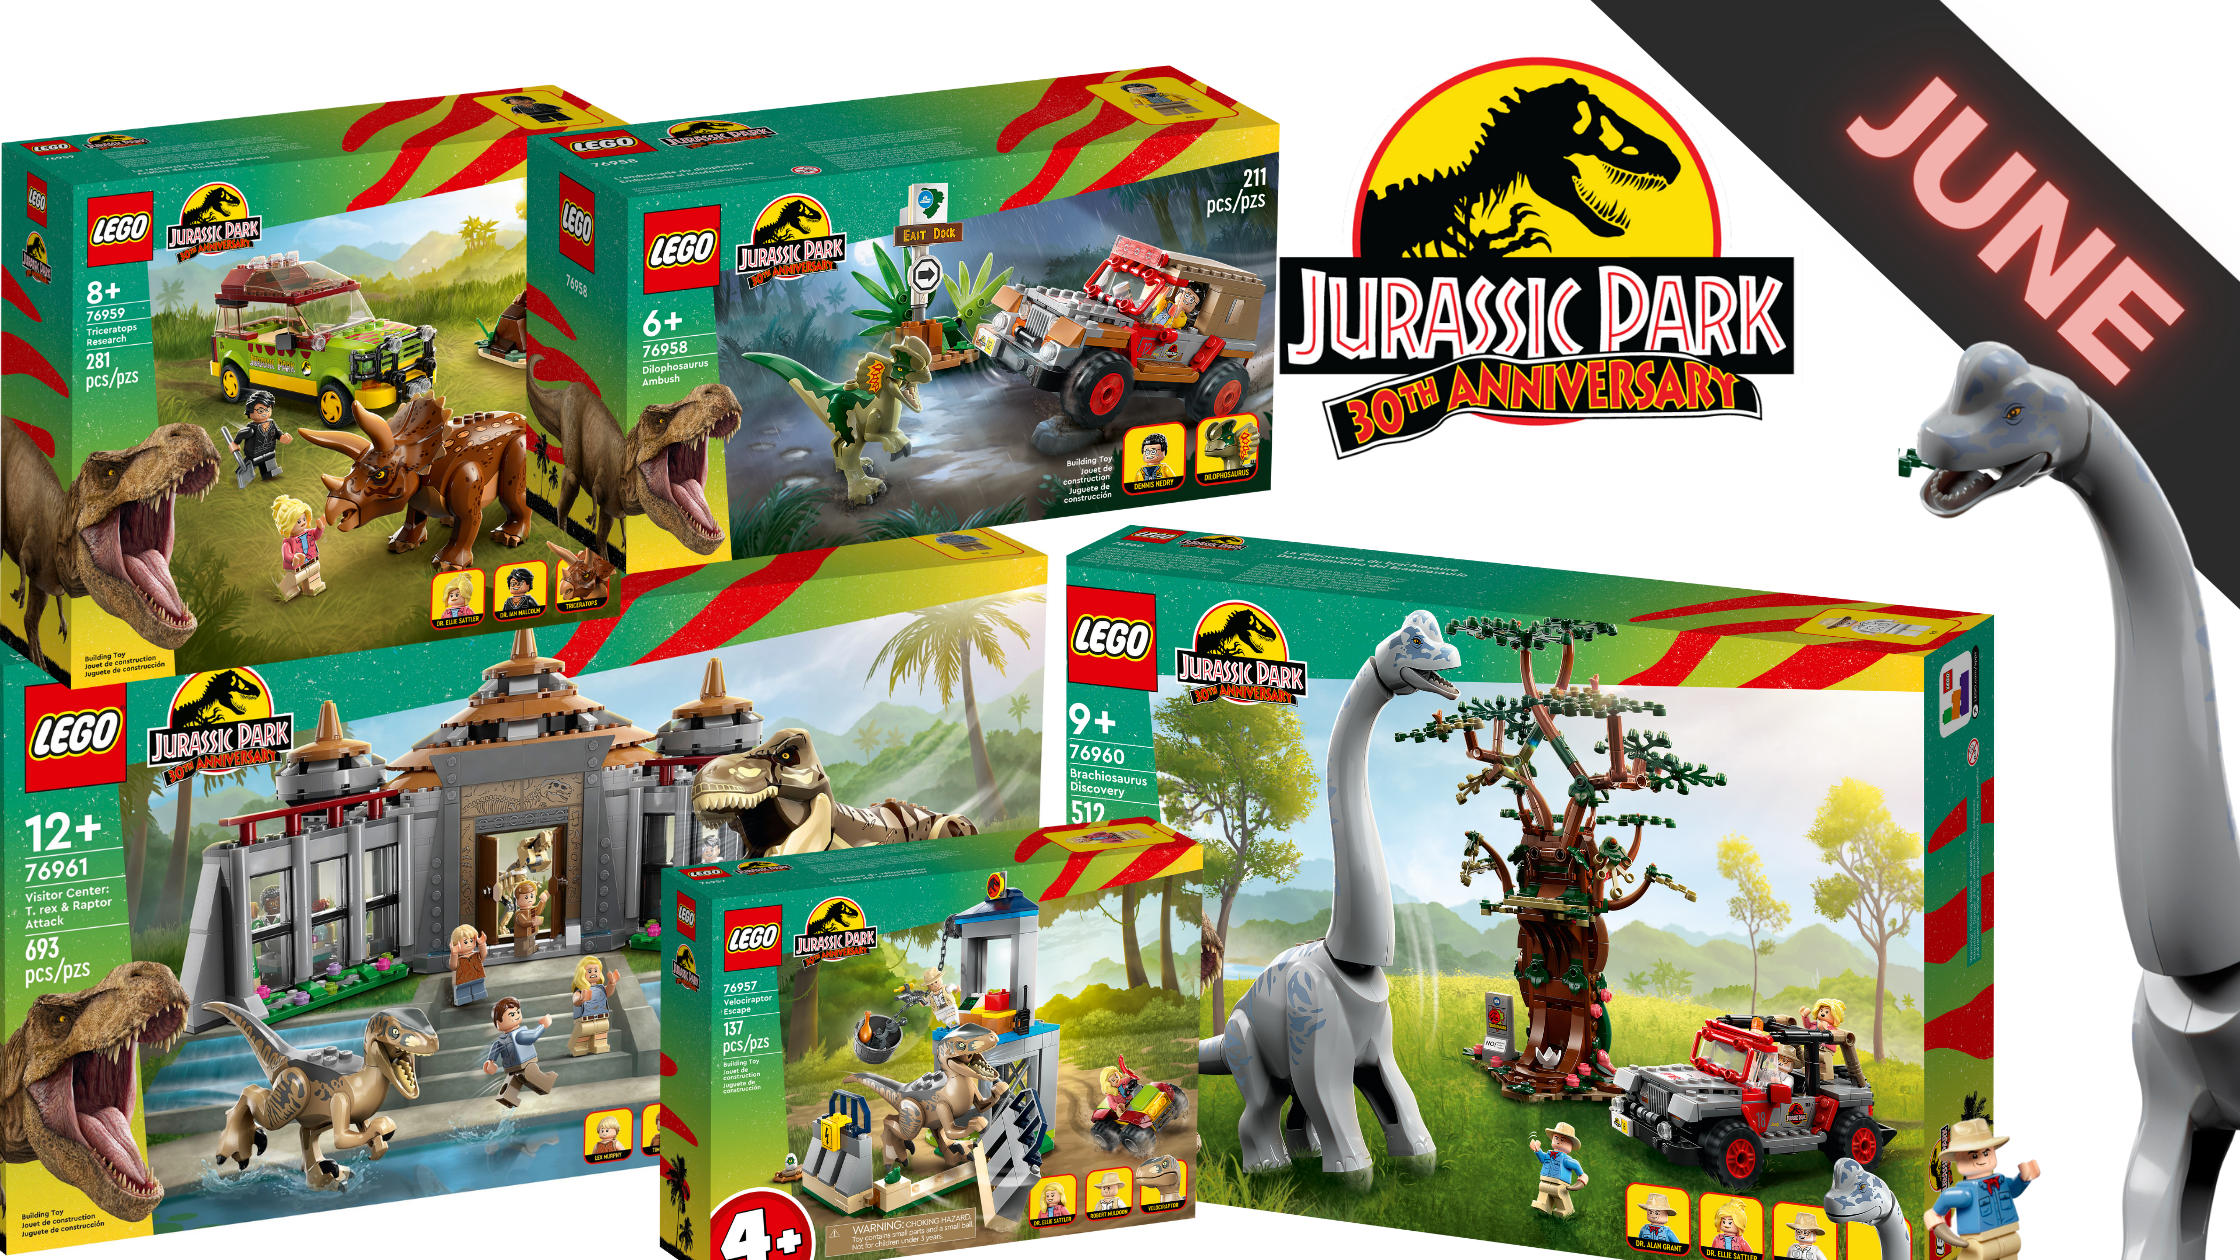 LEGO unveils five new Jurassic Park Anniversary sets for June 2023! - Jay's Brick